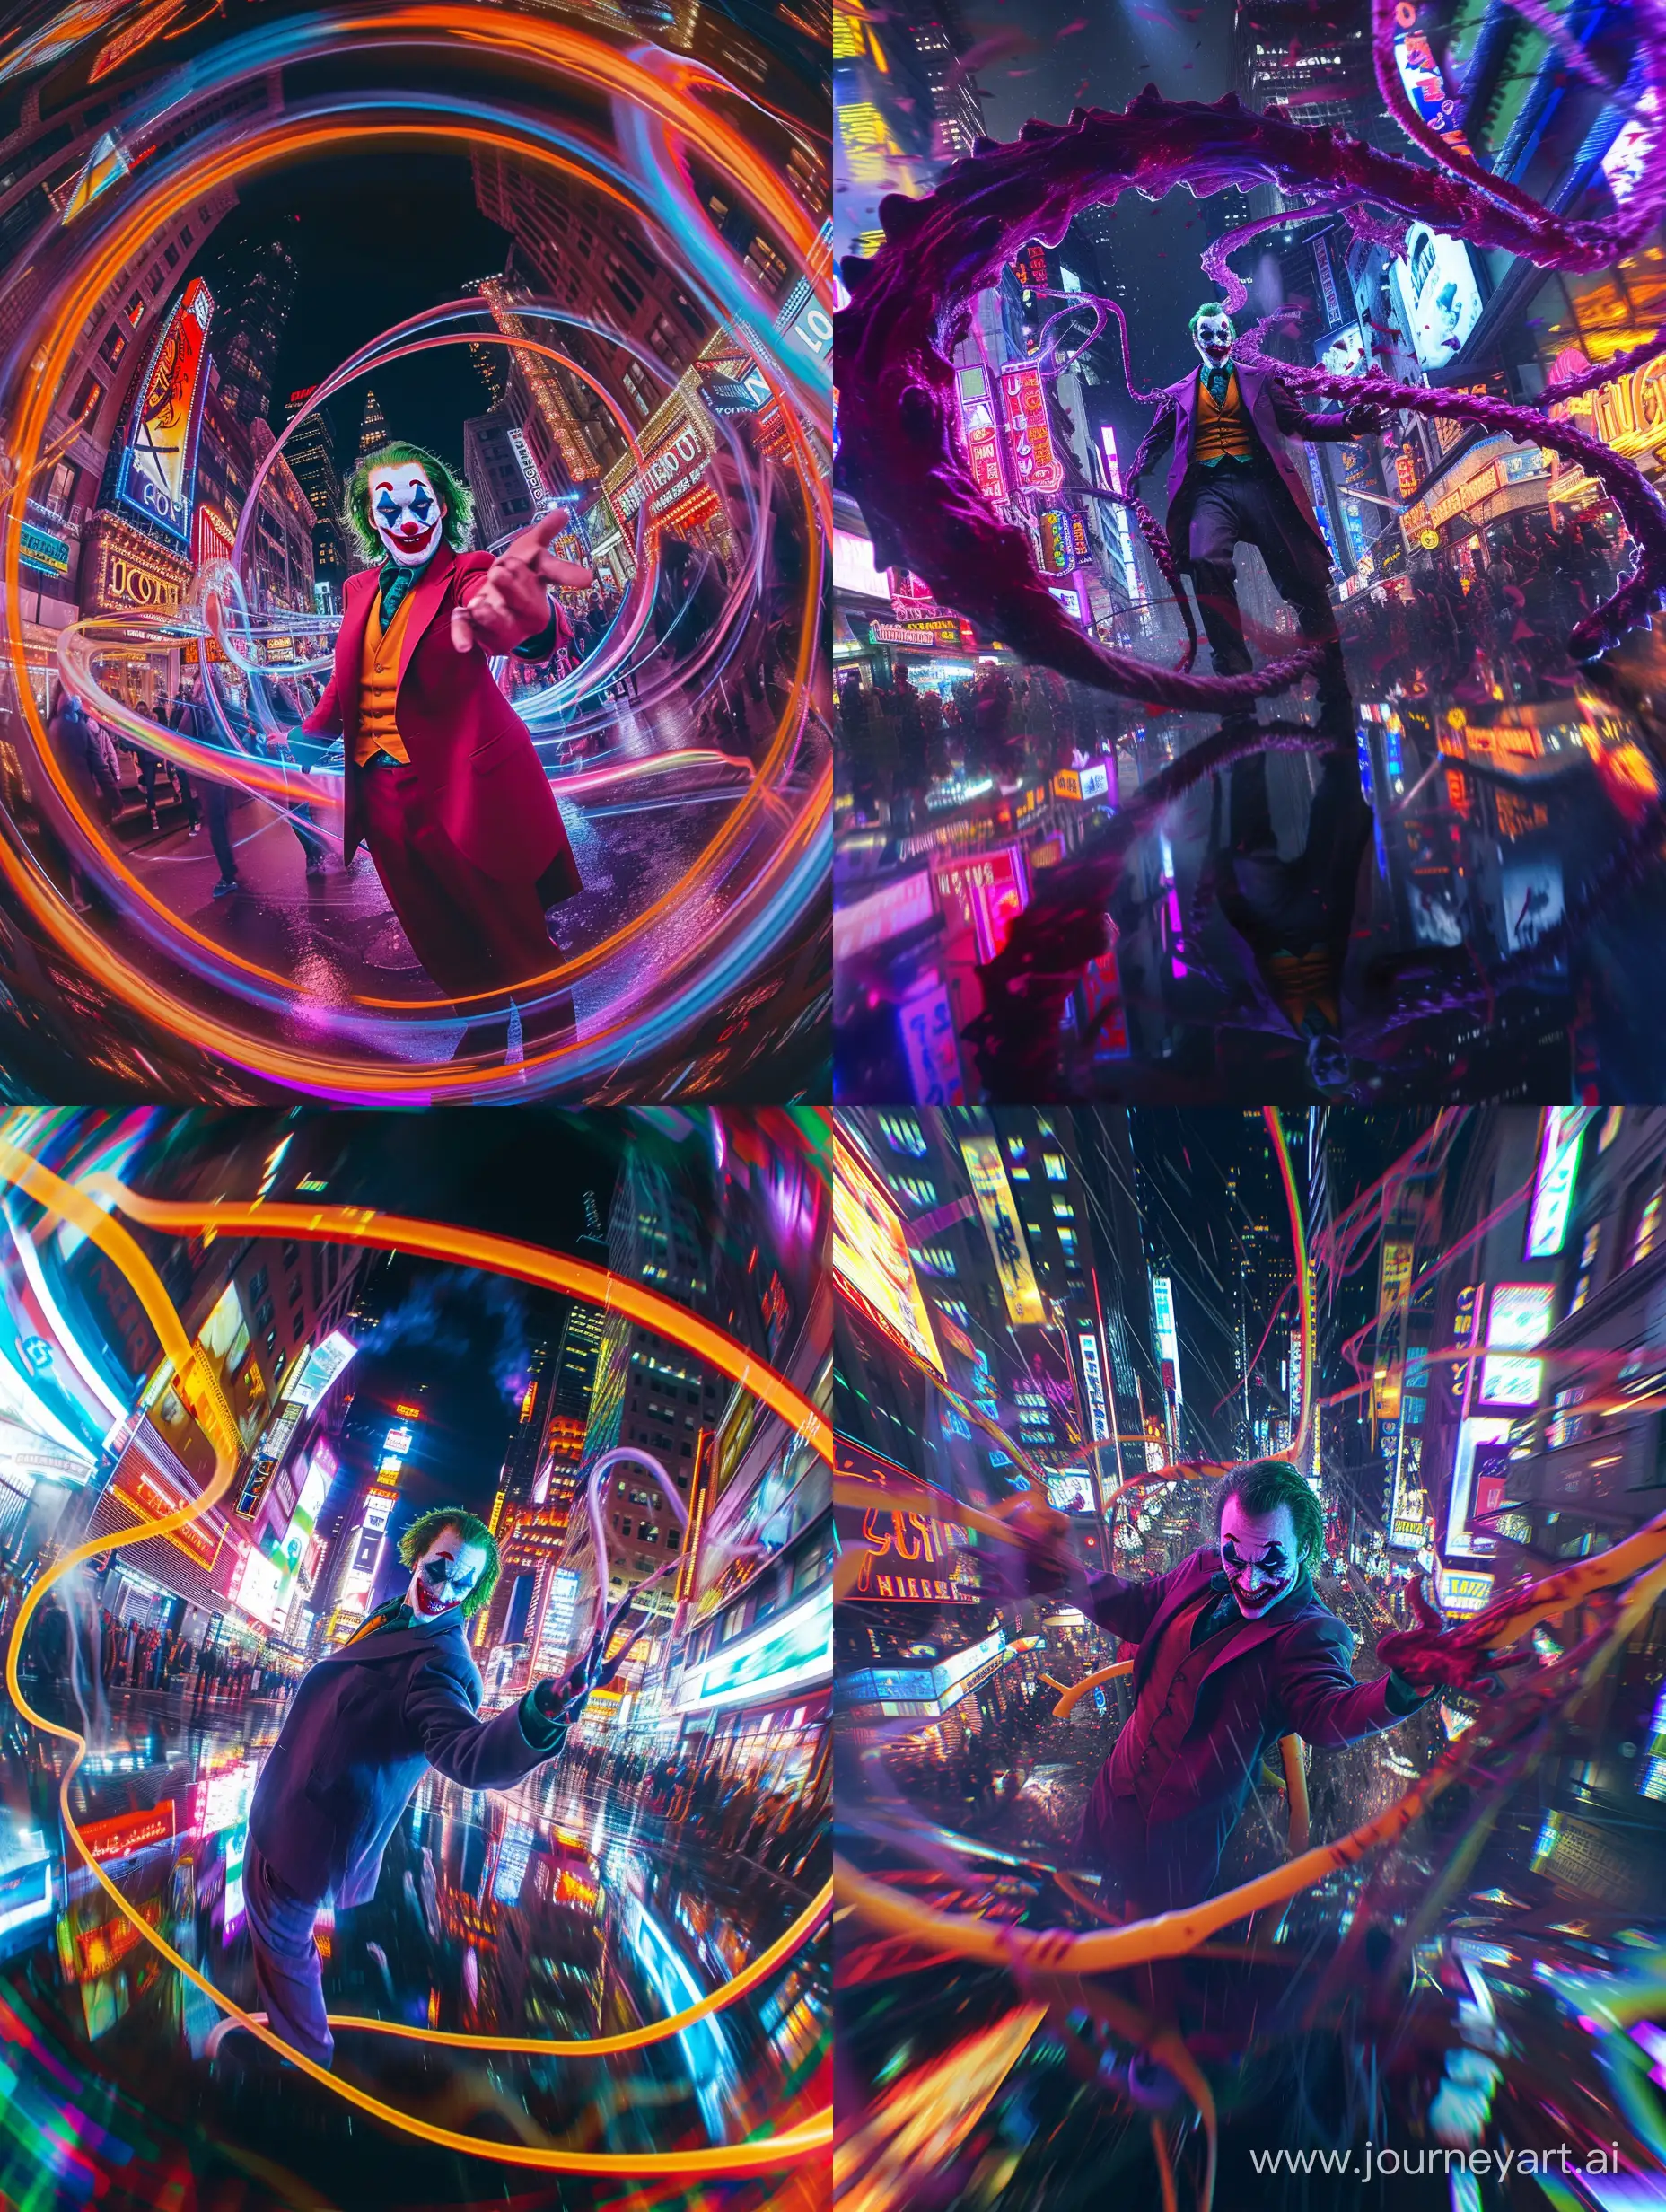 color photo of The Joker, completely unhinged and infected by a symbiote, in a chaotic urban setting at night. Neon lights and reflections illuminate the scene, creating a surreal and frenetic atmosphere. The symbiote tendrils wrap around The Joker's body, pulsating with an otherworldly glow, as he revels in the chaos surrounding him. Shot with a fisheye lens, the distorted perspective adds a sense of disorientation and visual intensity. The vibrant colors of the cityscape and the symbiote's luminescence create a striking contrast against the dark night sky. Experimenting with long exposure techniques, such as light painting or capturing motion blur, can further enhance the dynamic energy and surreal nature of the scene